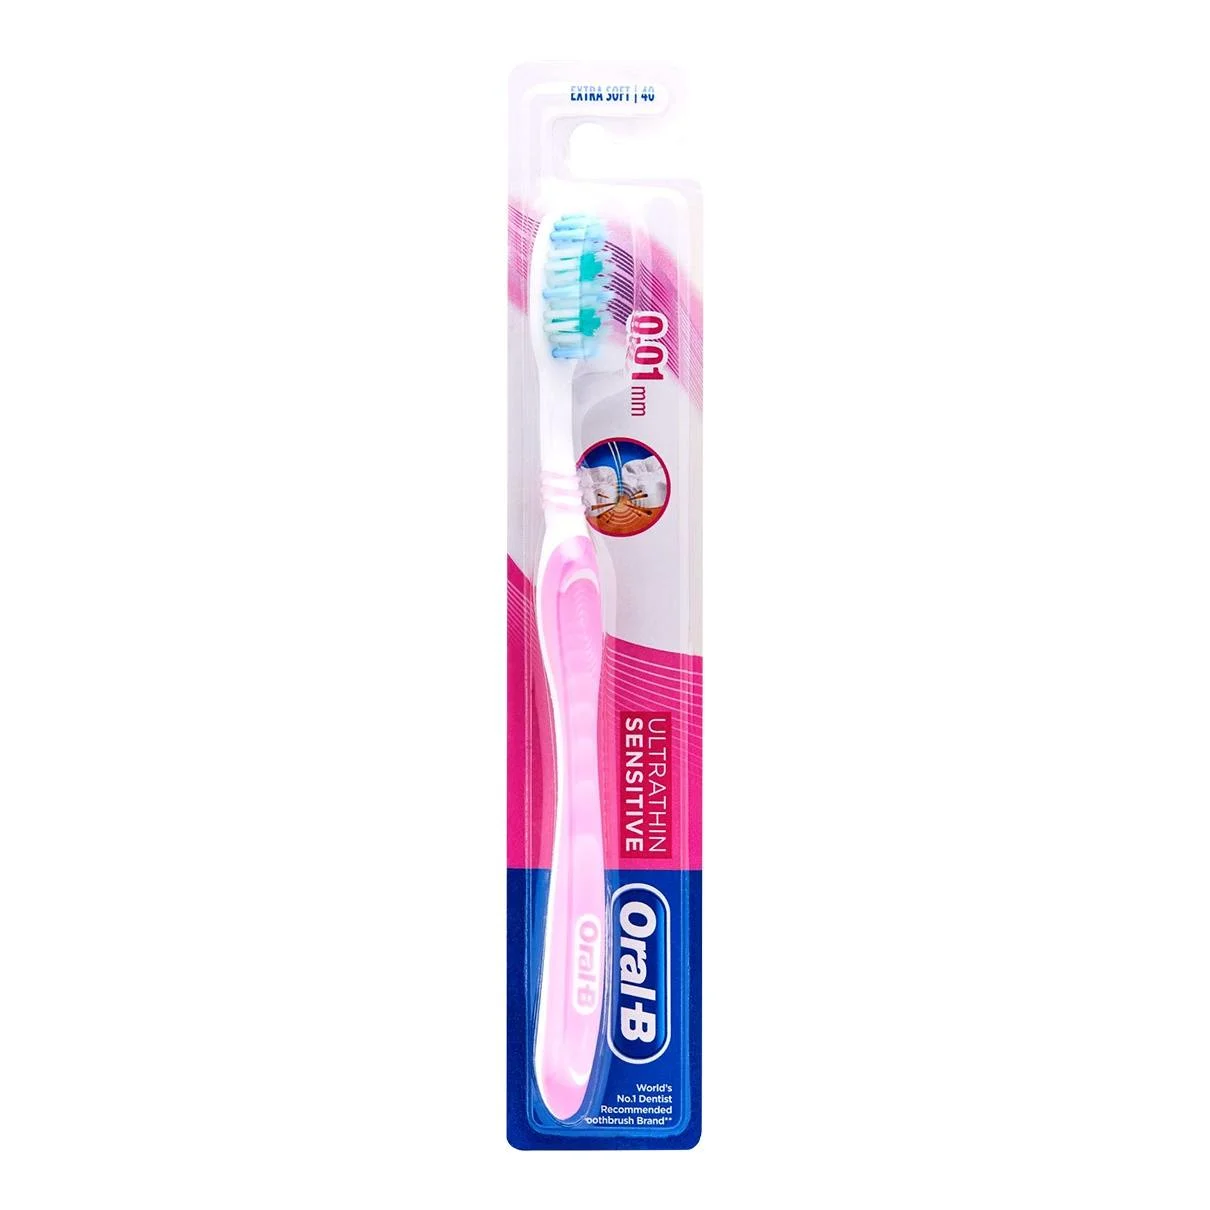 Oral-B Ultrathin Sensitive Toothbrush undefined